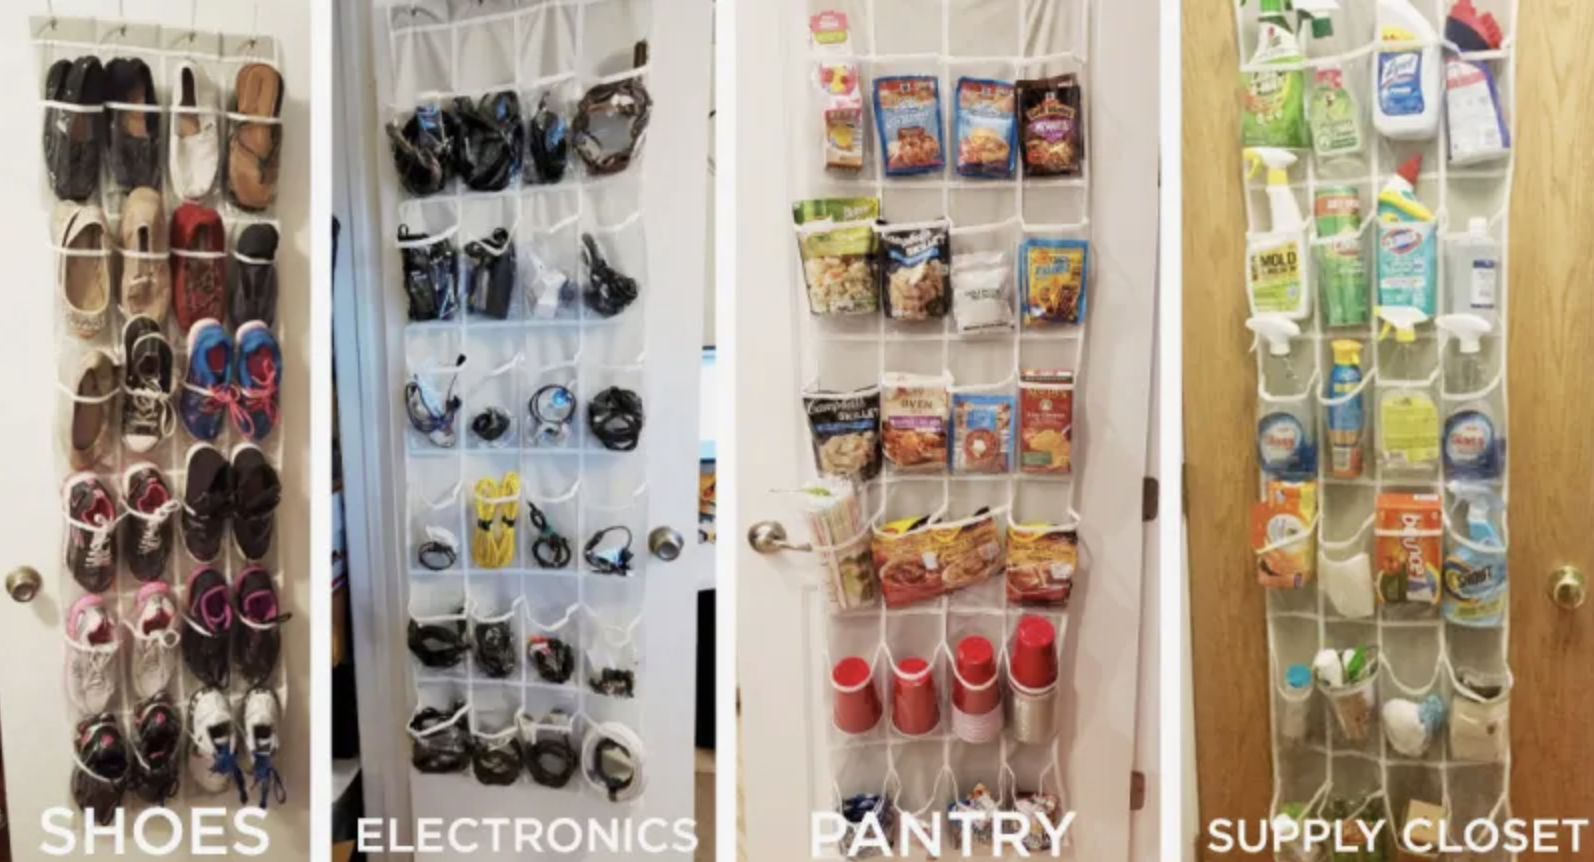 side by side images of four simple houseware over the door organizer storing shoes, electronics, pantry items, and cleaning supplies in a supply closet